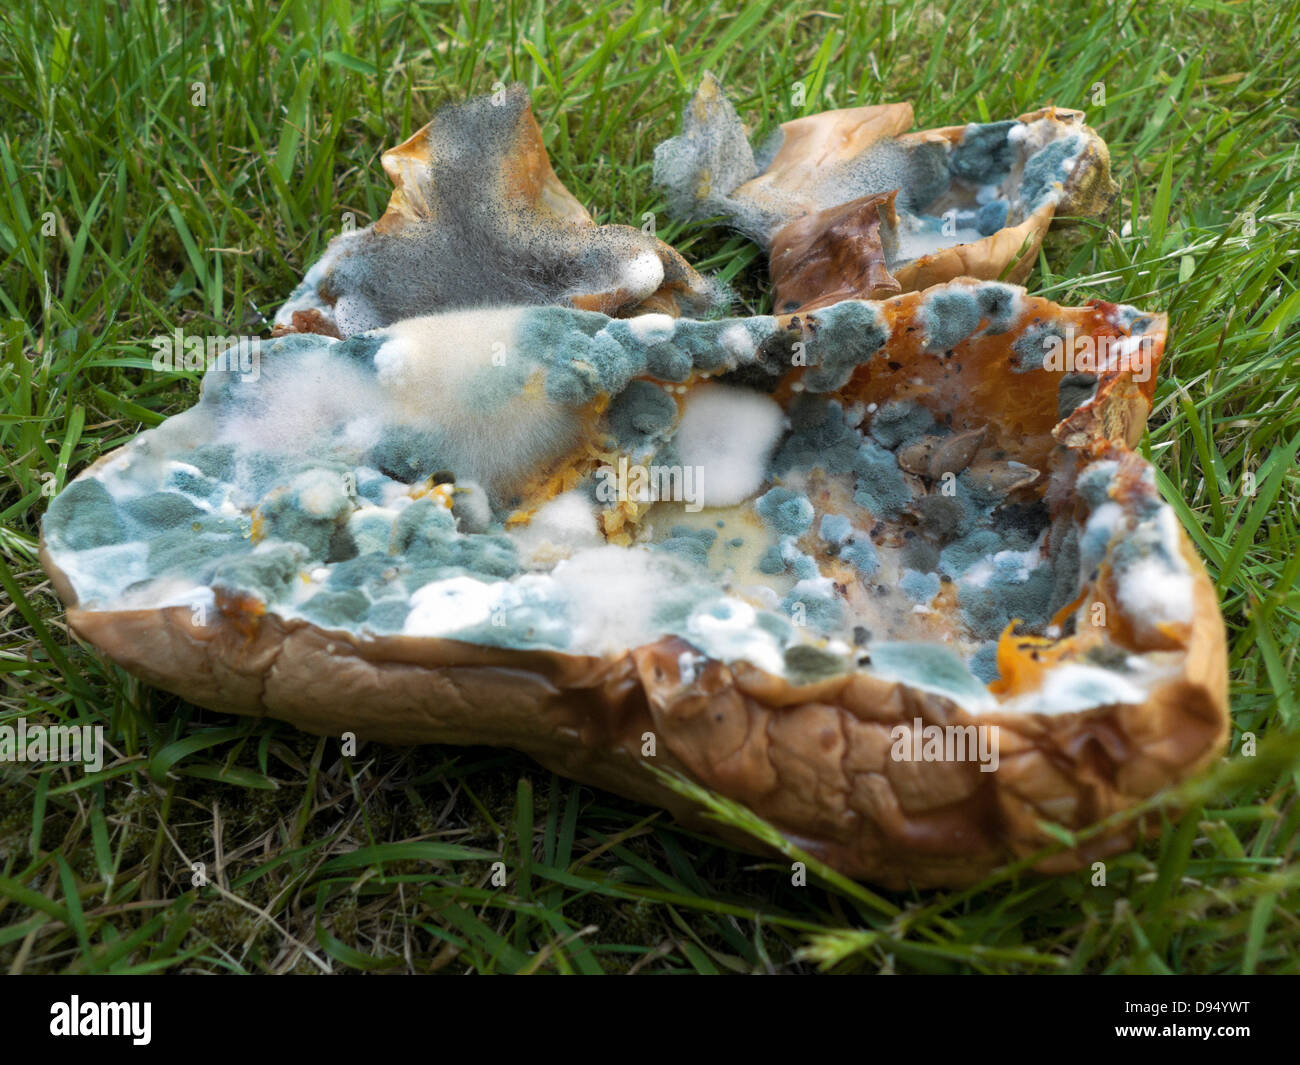 Mould growth on a baked neglected butternut squash a week after cooking Wales UK  KATHY DEWITT Stock Photo